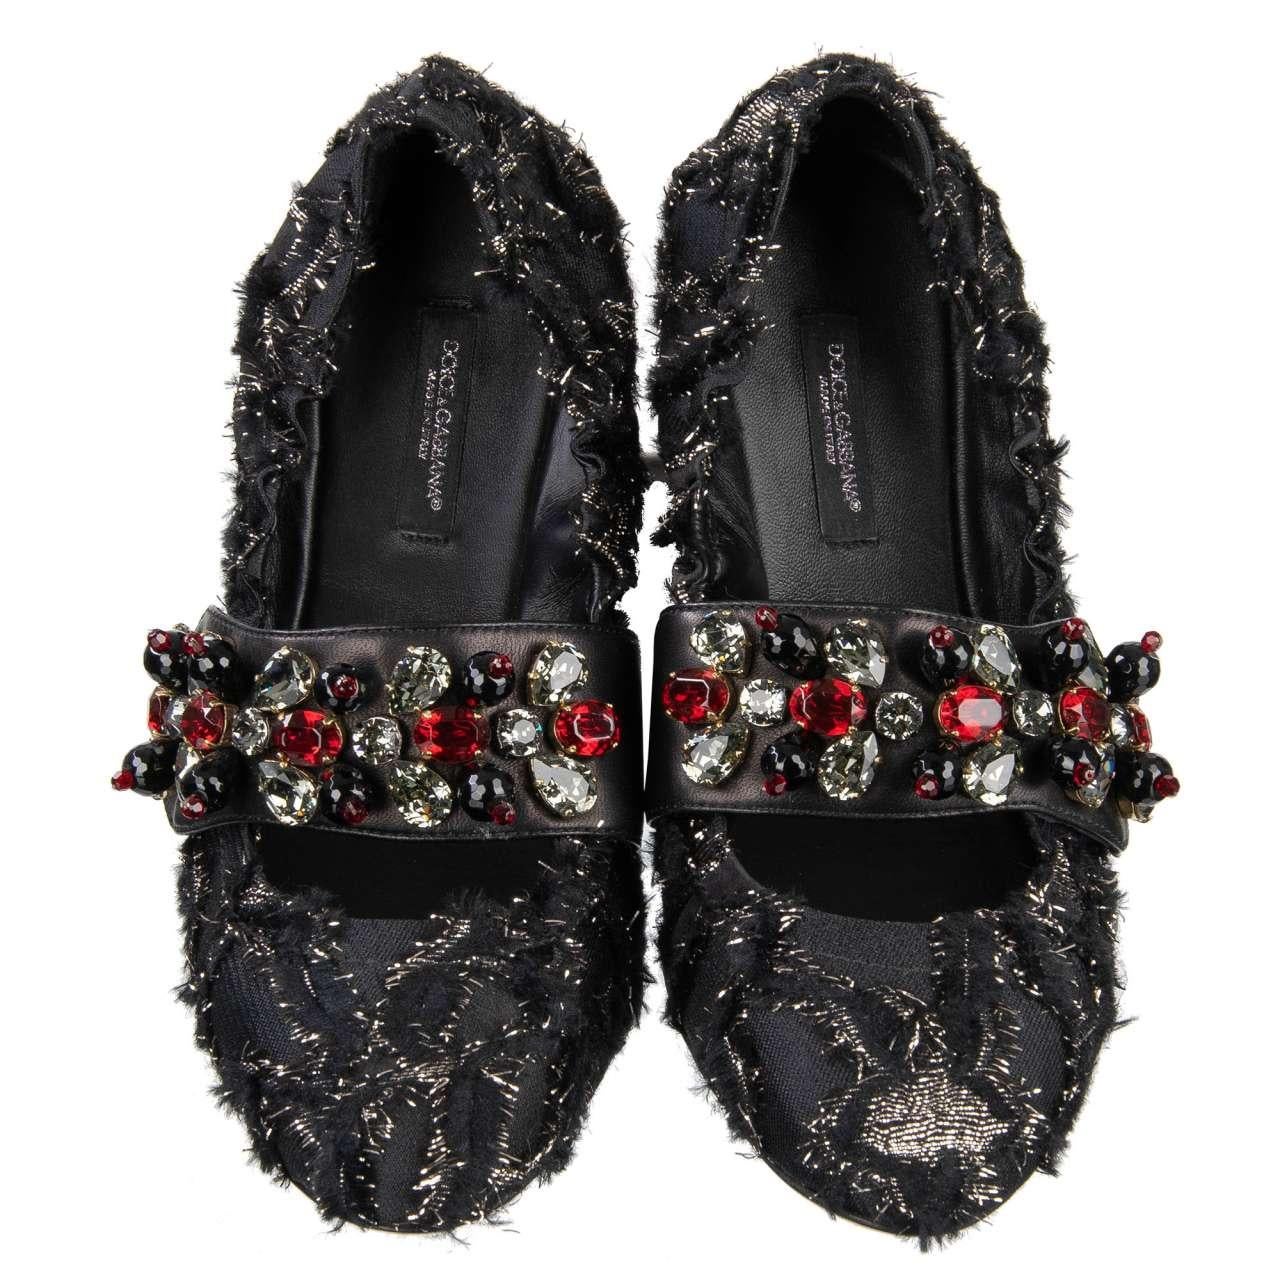 Women's Dolce & Gabbana - Brocade Ballet Flats VALLY with Crystals EUR 38 For Sale